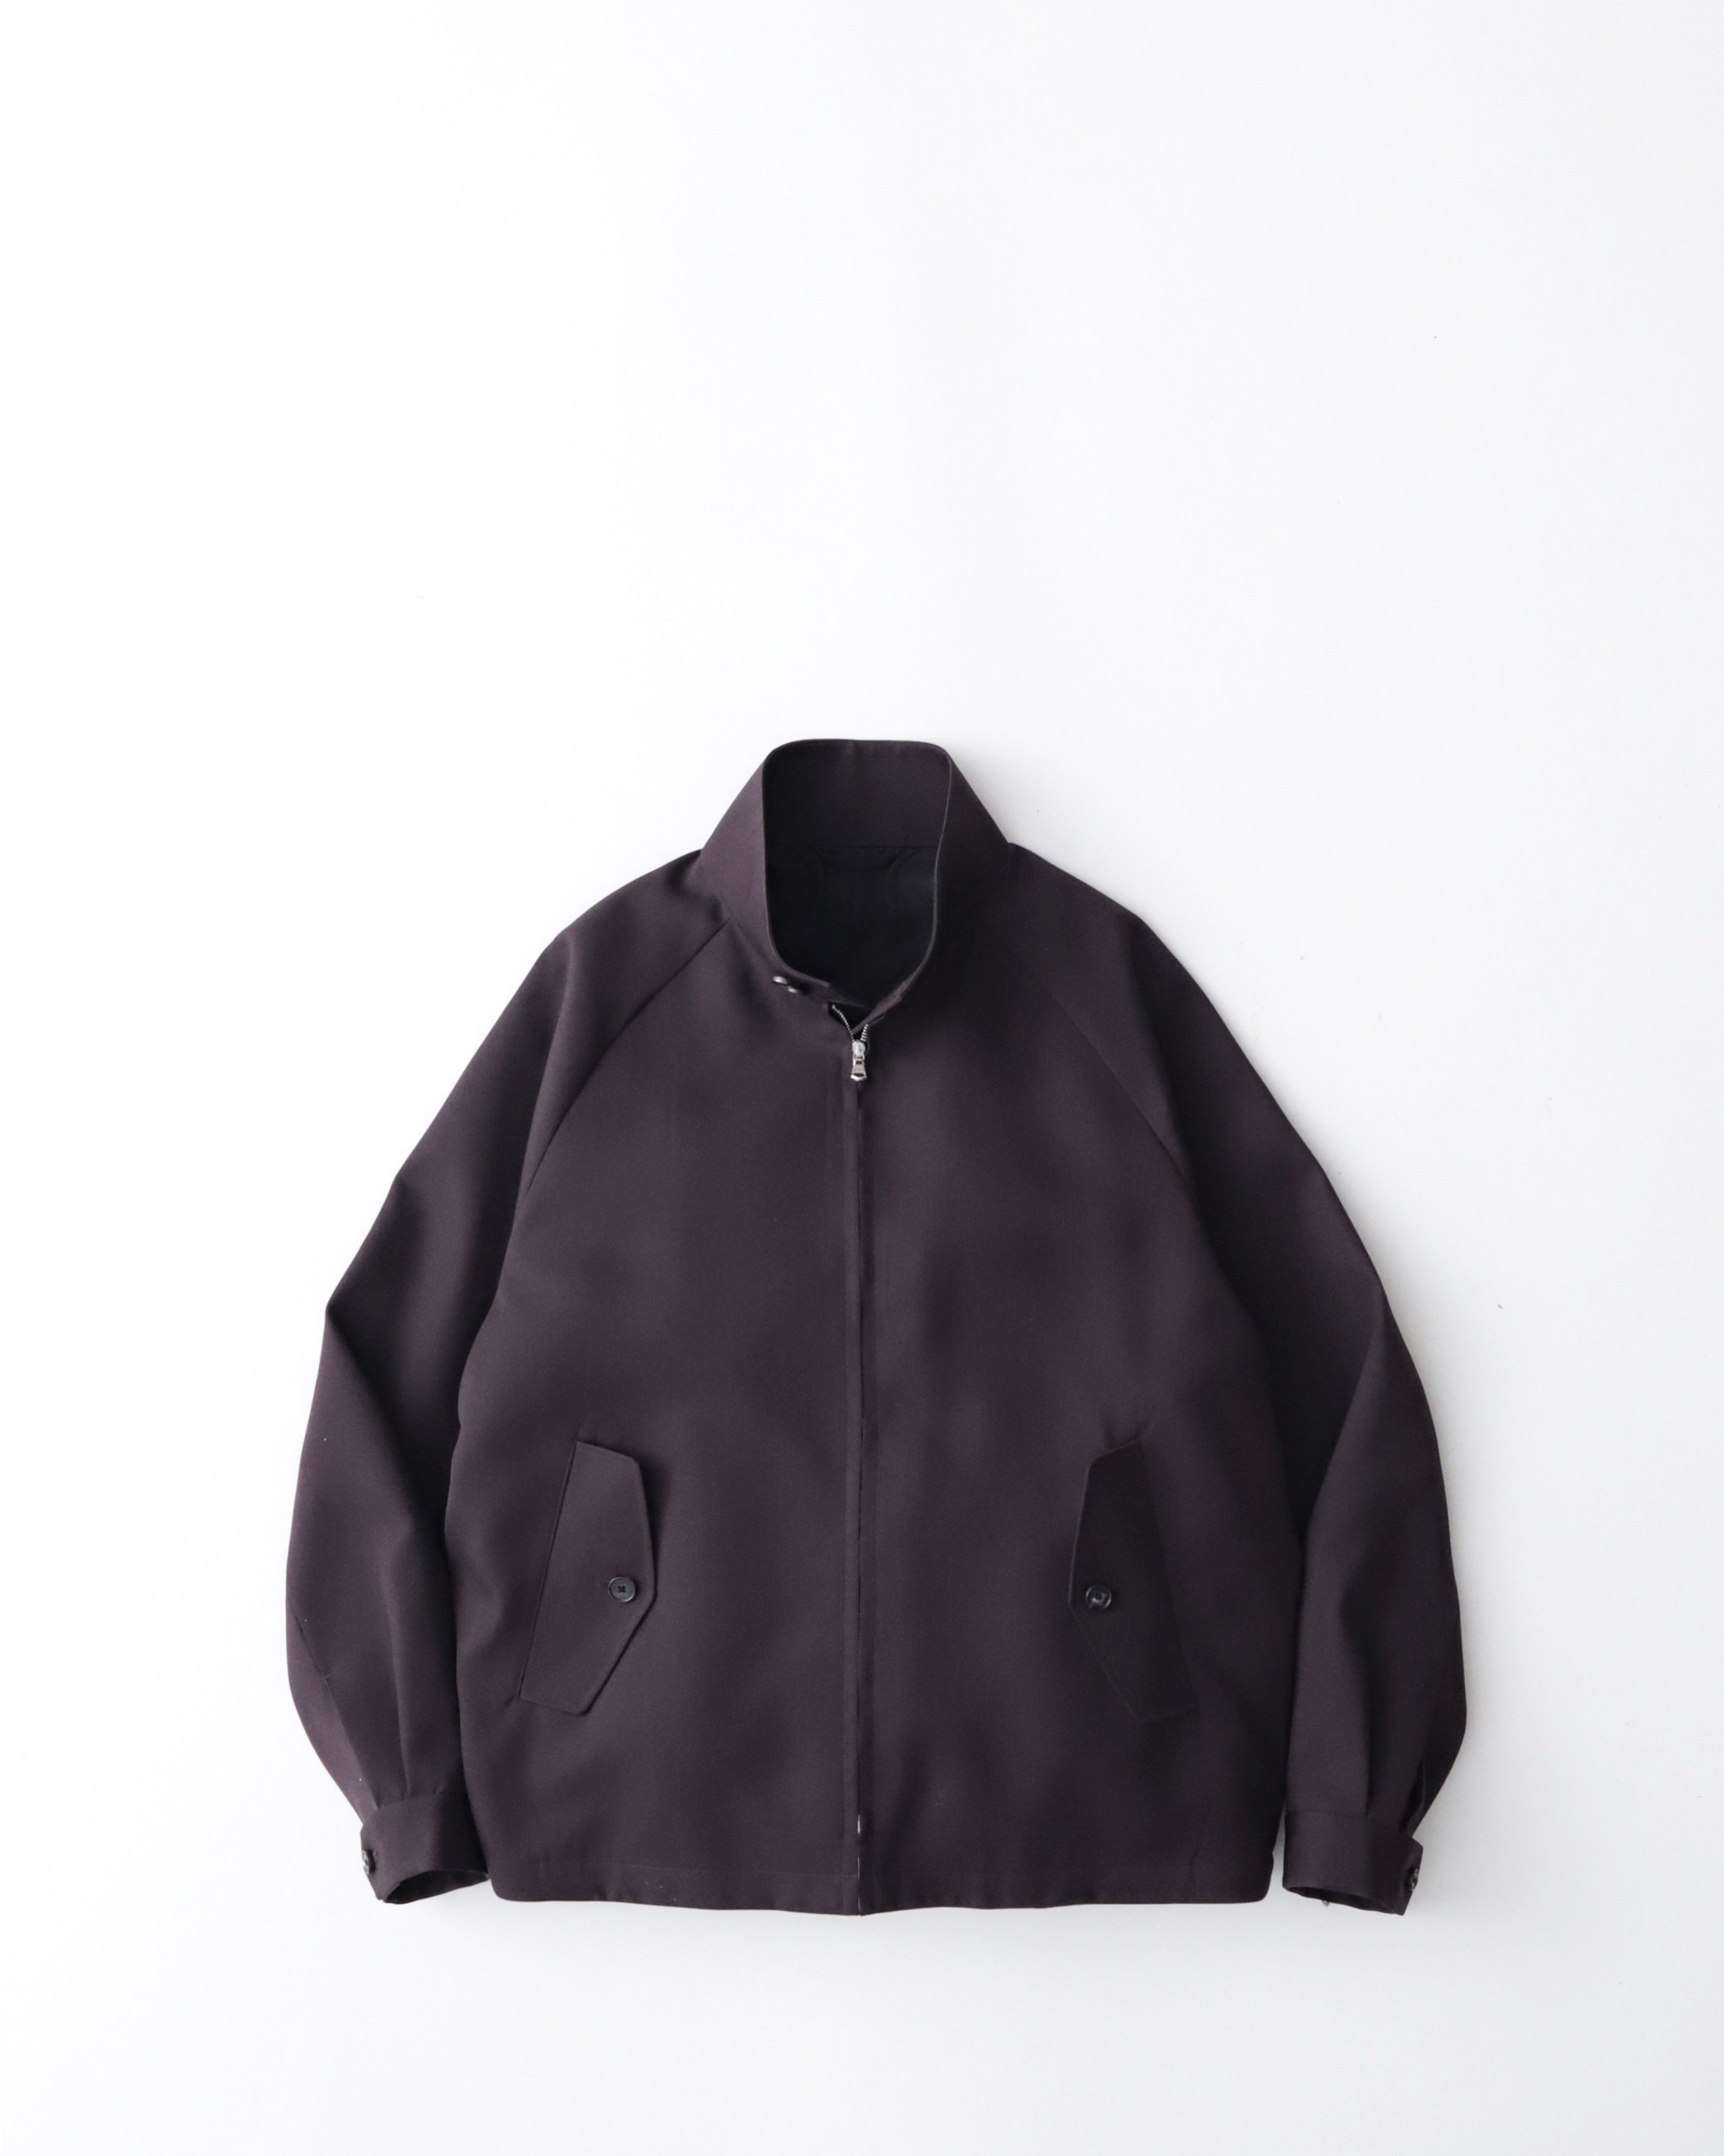 TheCLASIK 23SS jacket